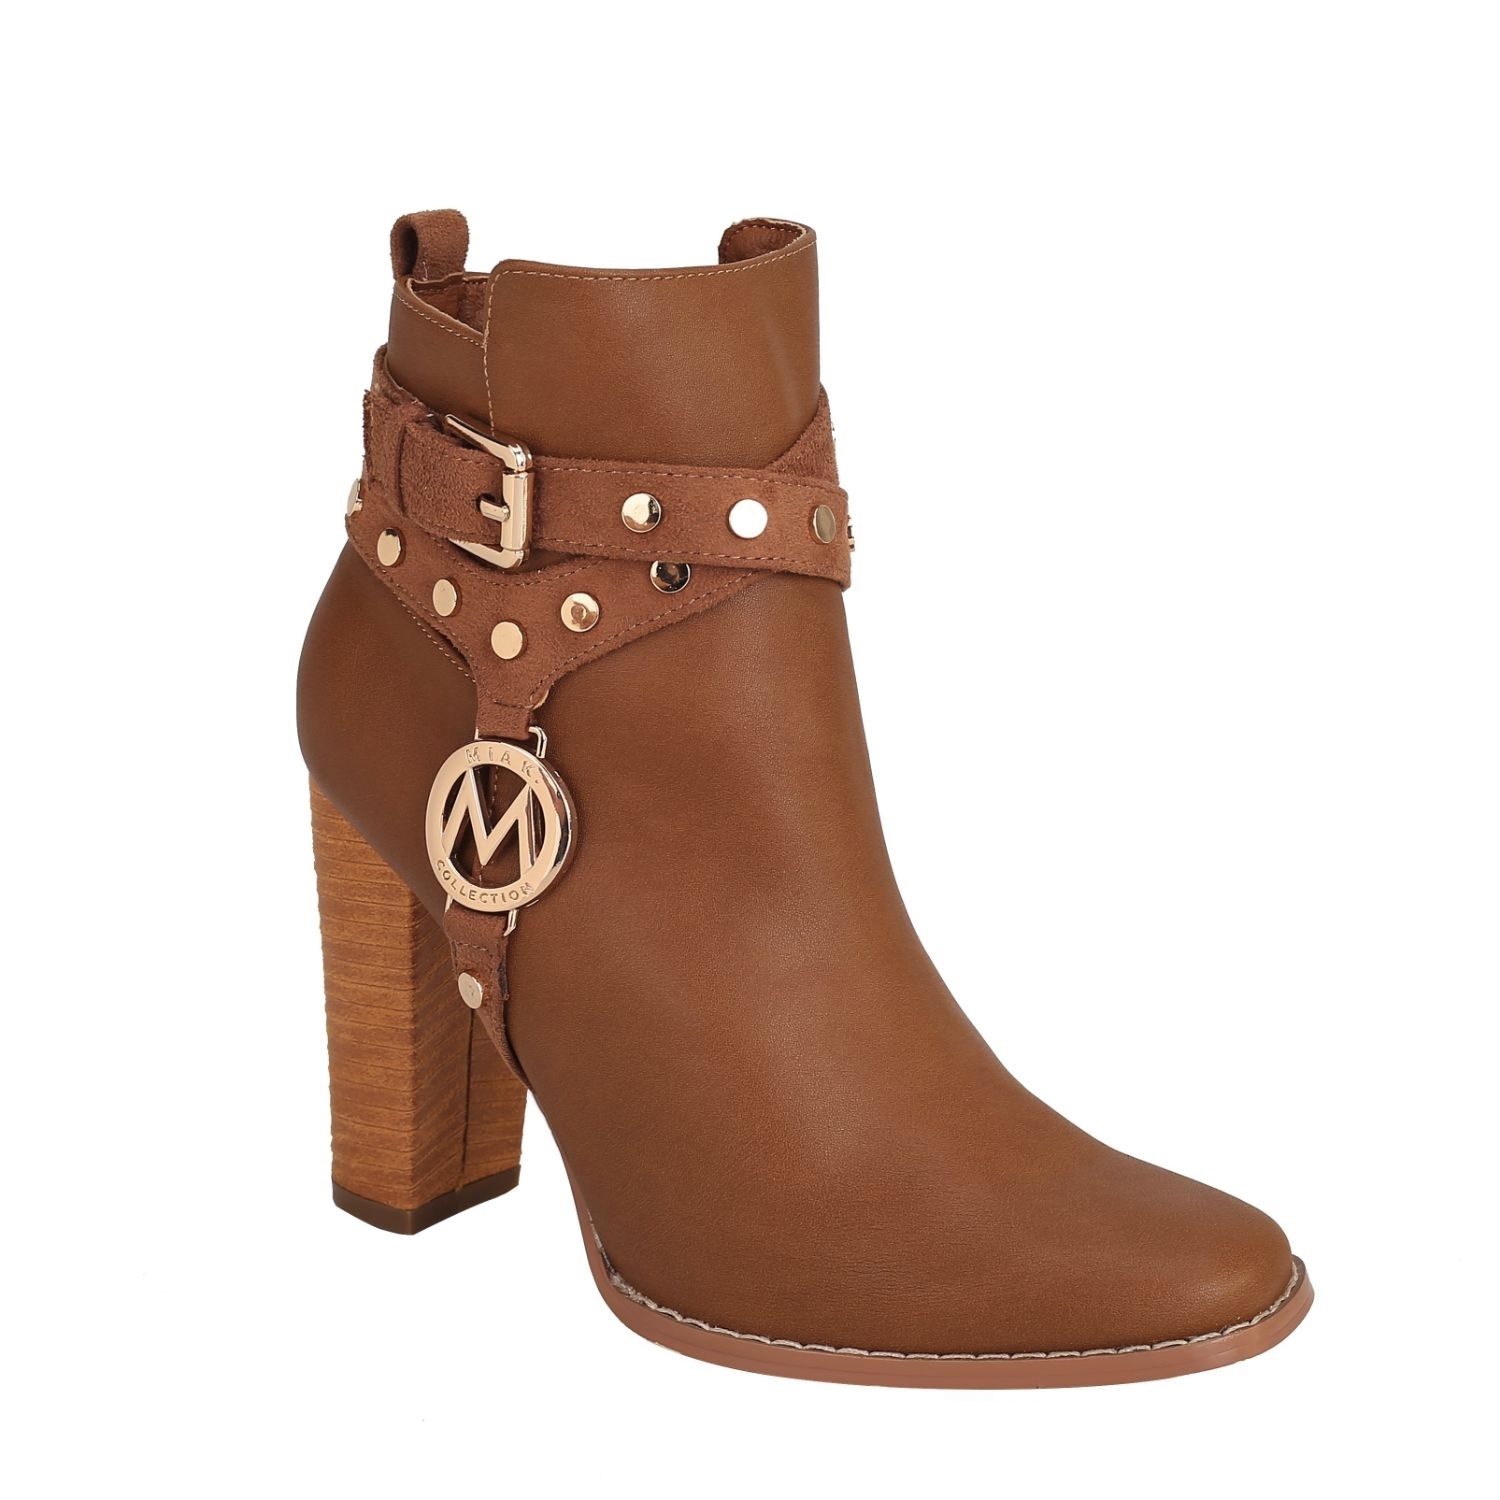 MKF Collection Brooke Ankle Women's Boot With Wide Heel By Mia K - Cognac-10